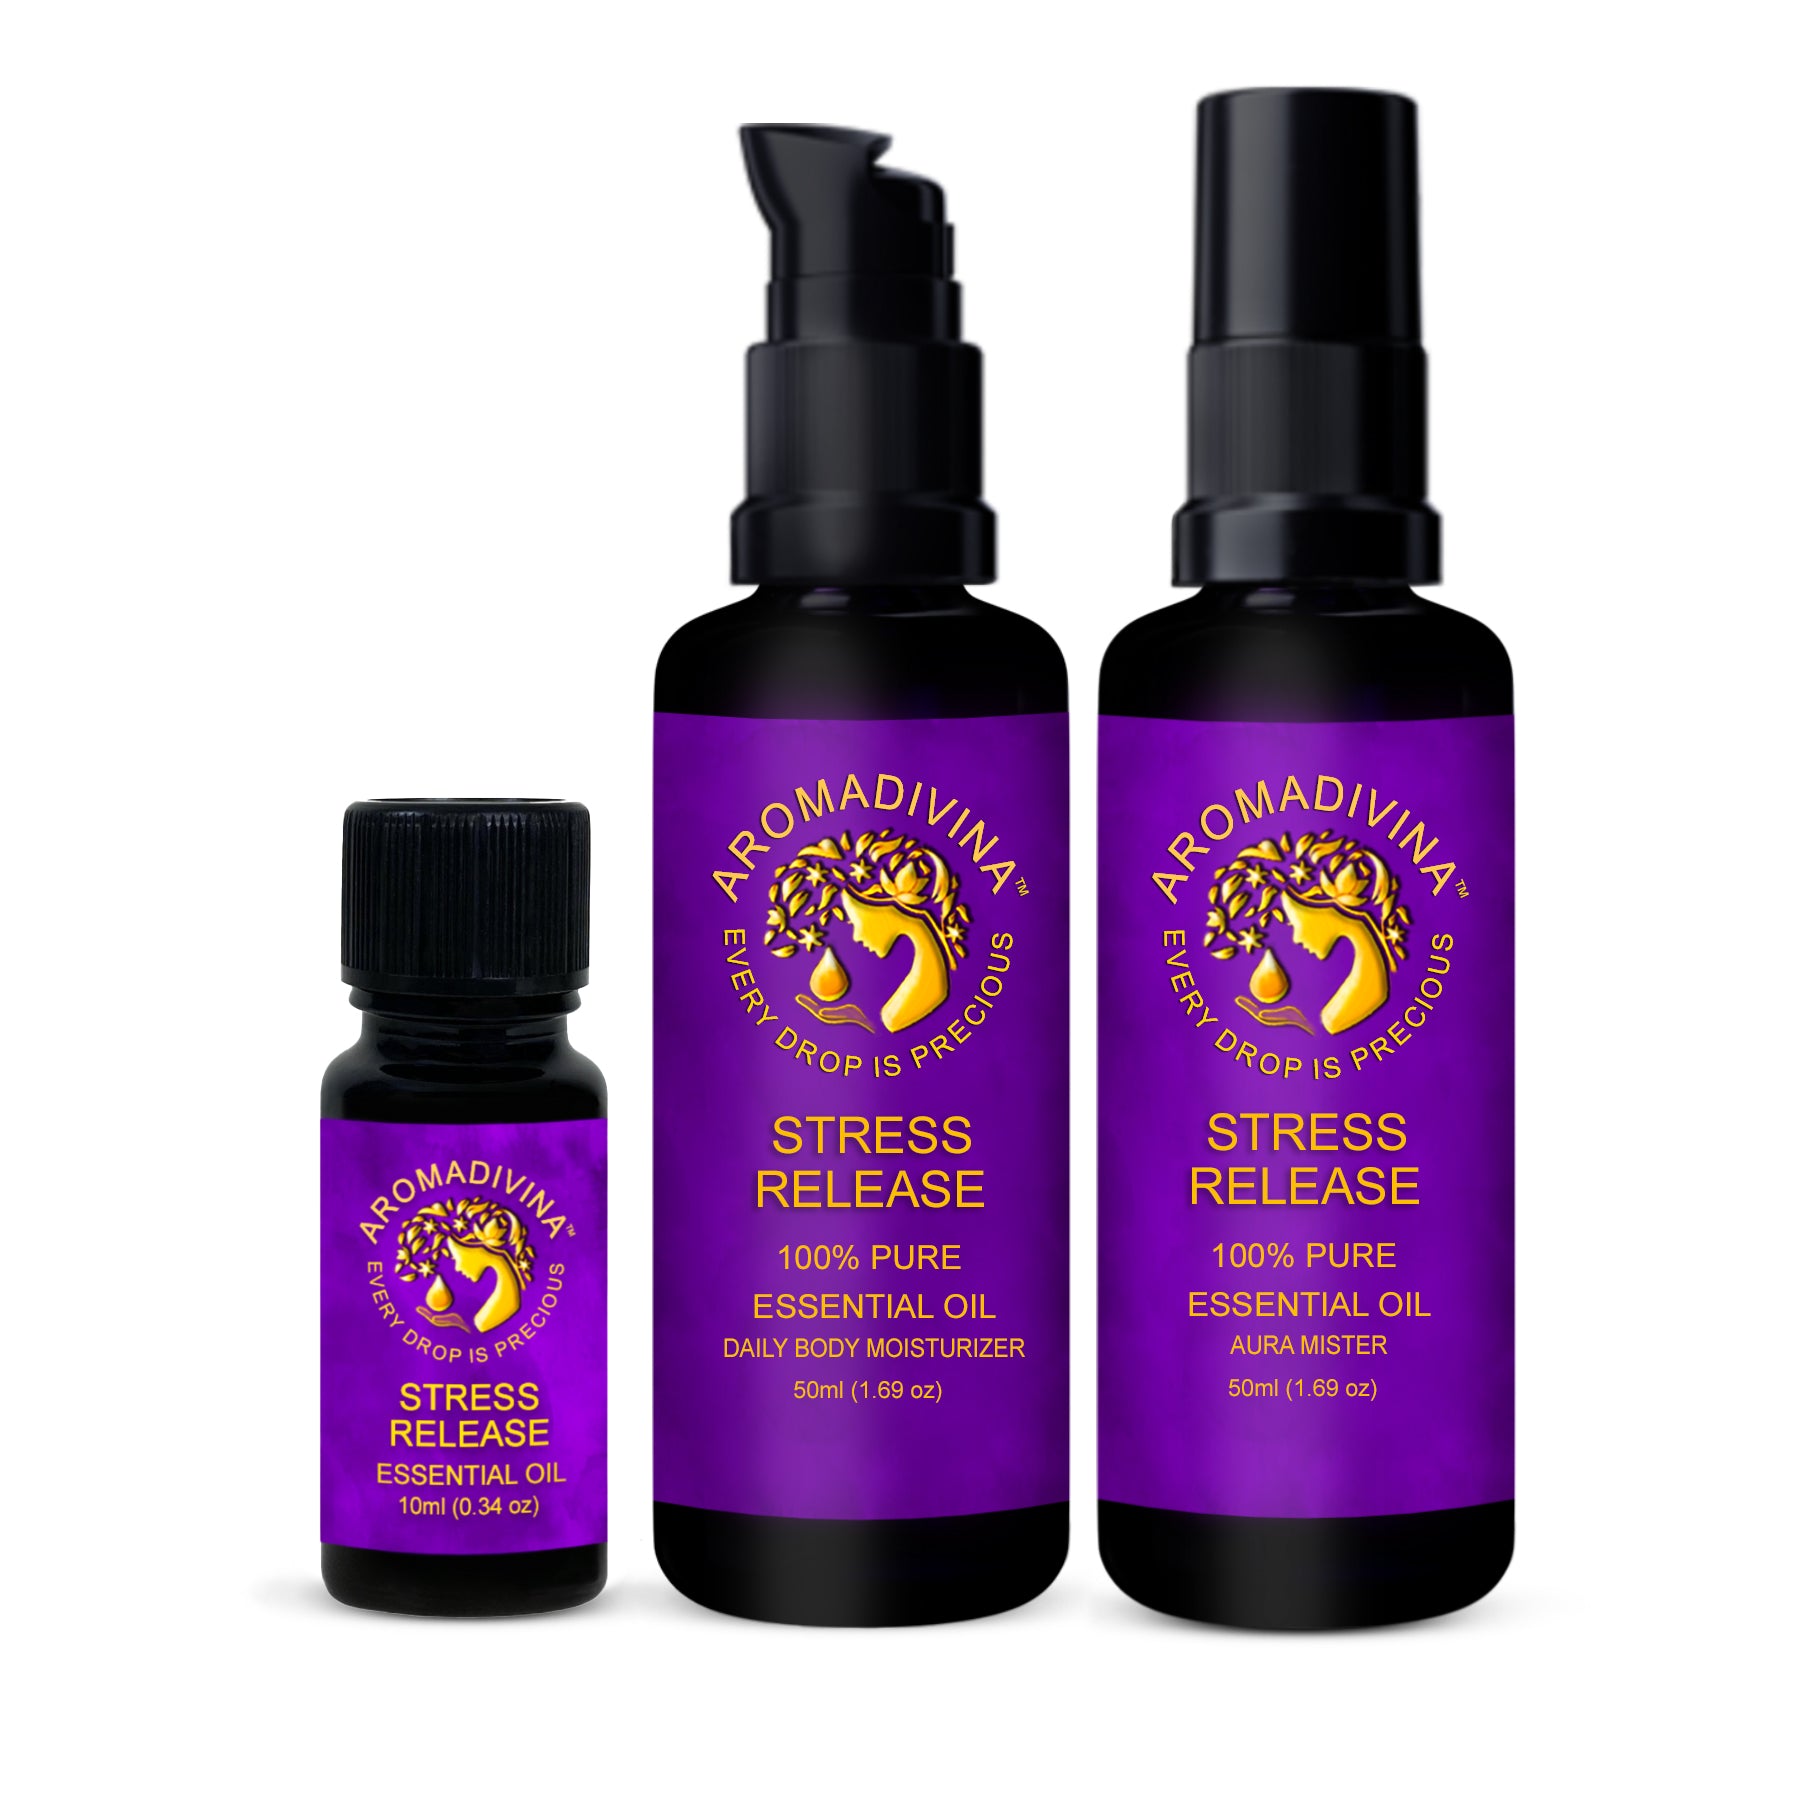 Stress Release Combination Pack